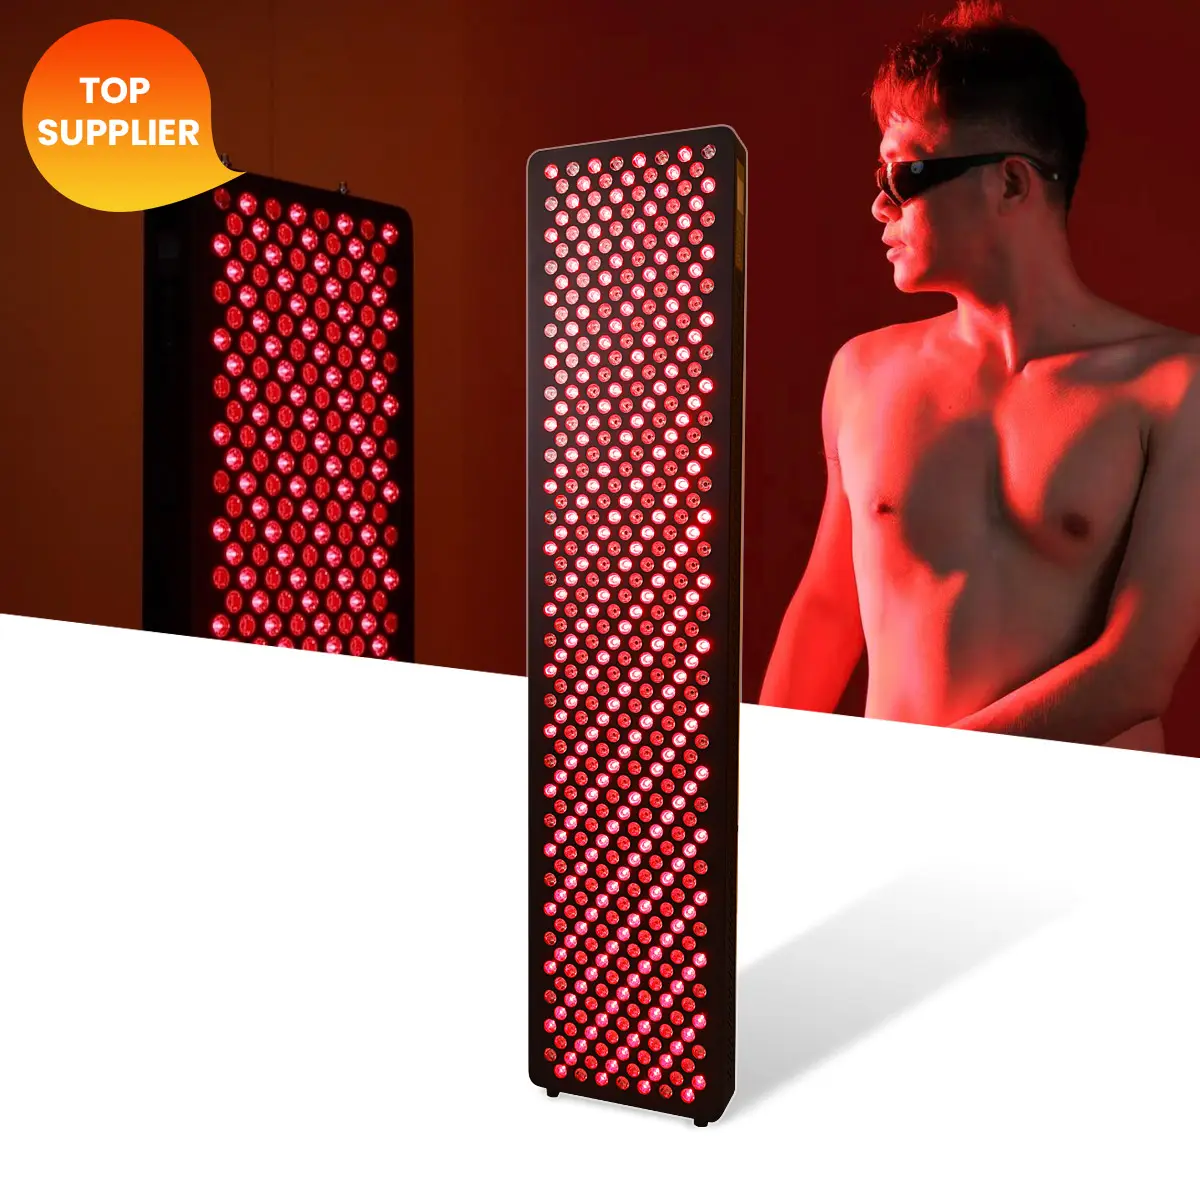 Red Light Therapy Panels 2 Wavelength 660 850nm  or 5 Wavelength 630 660 810 830 850nm  Full Body Infrared Light Therapy Panel